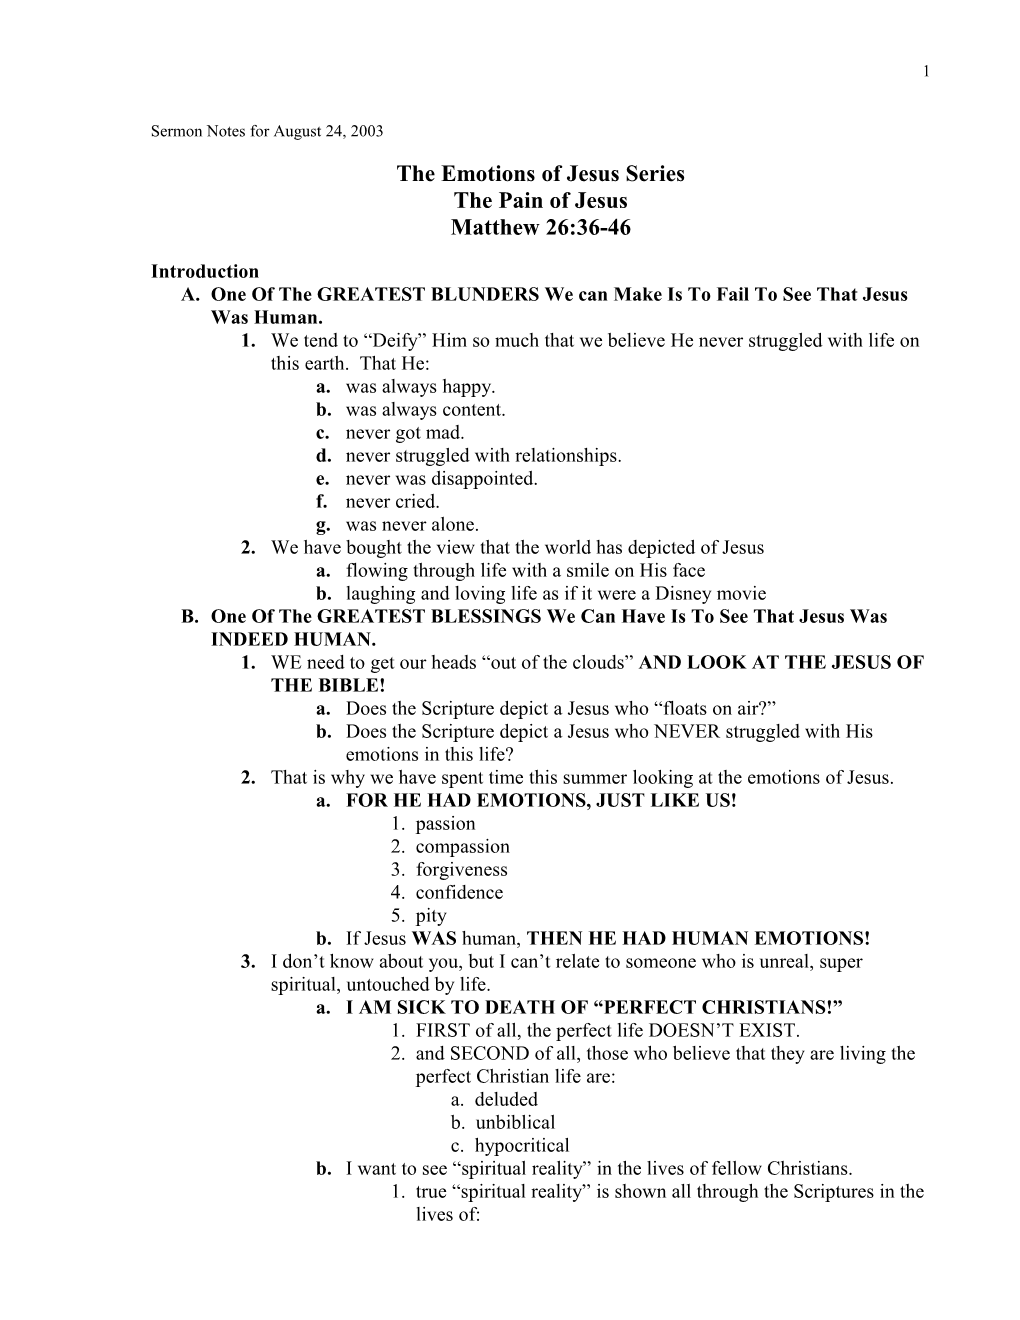 Sermon Notes for August 24, 2003